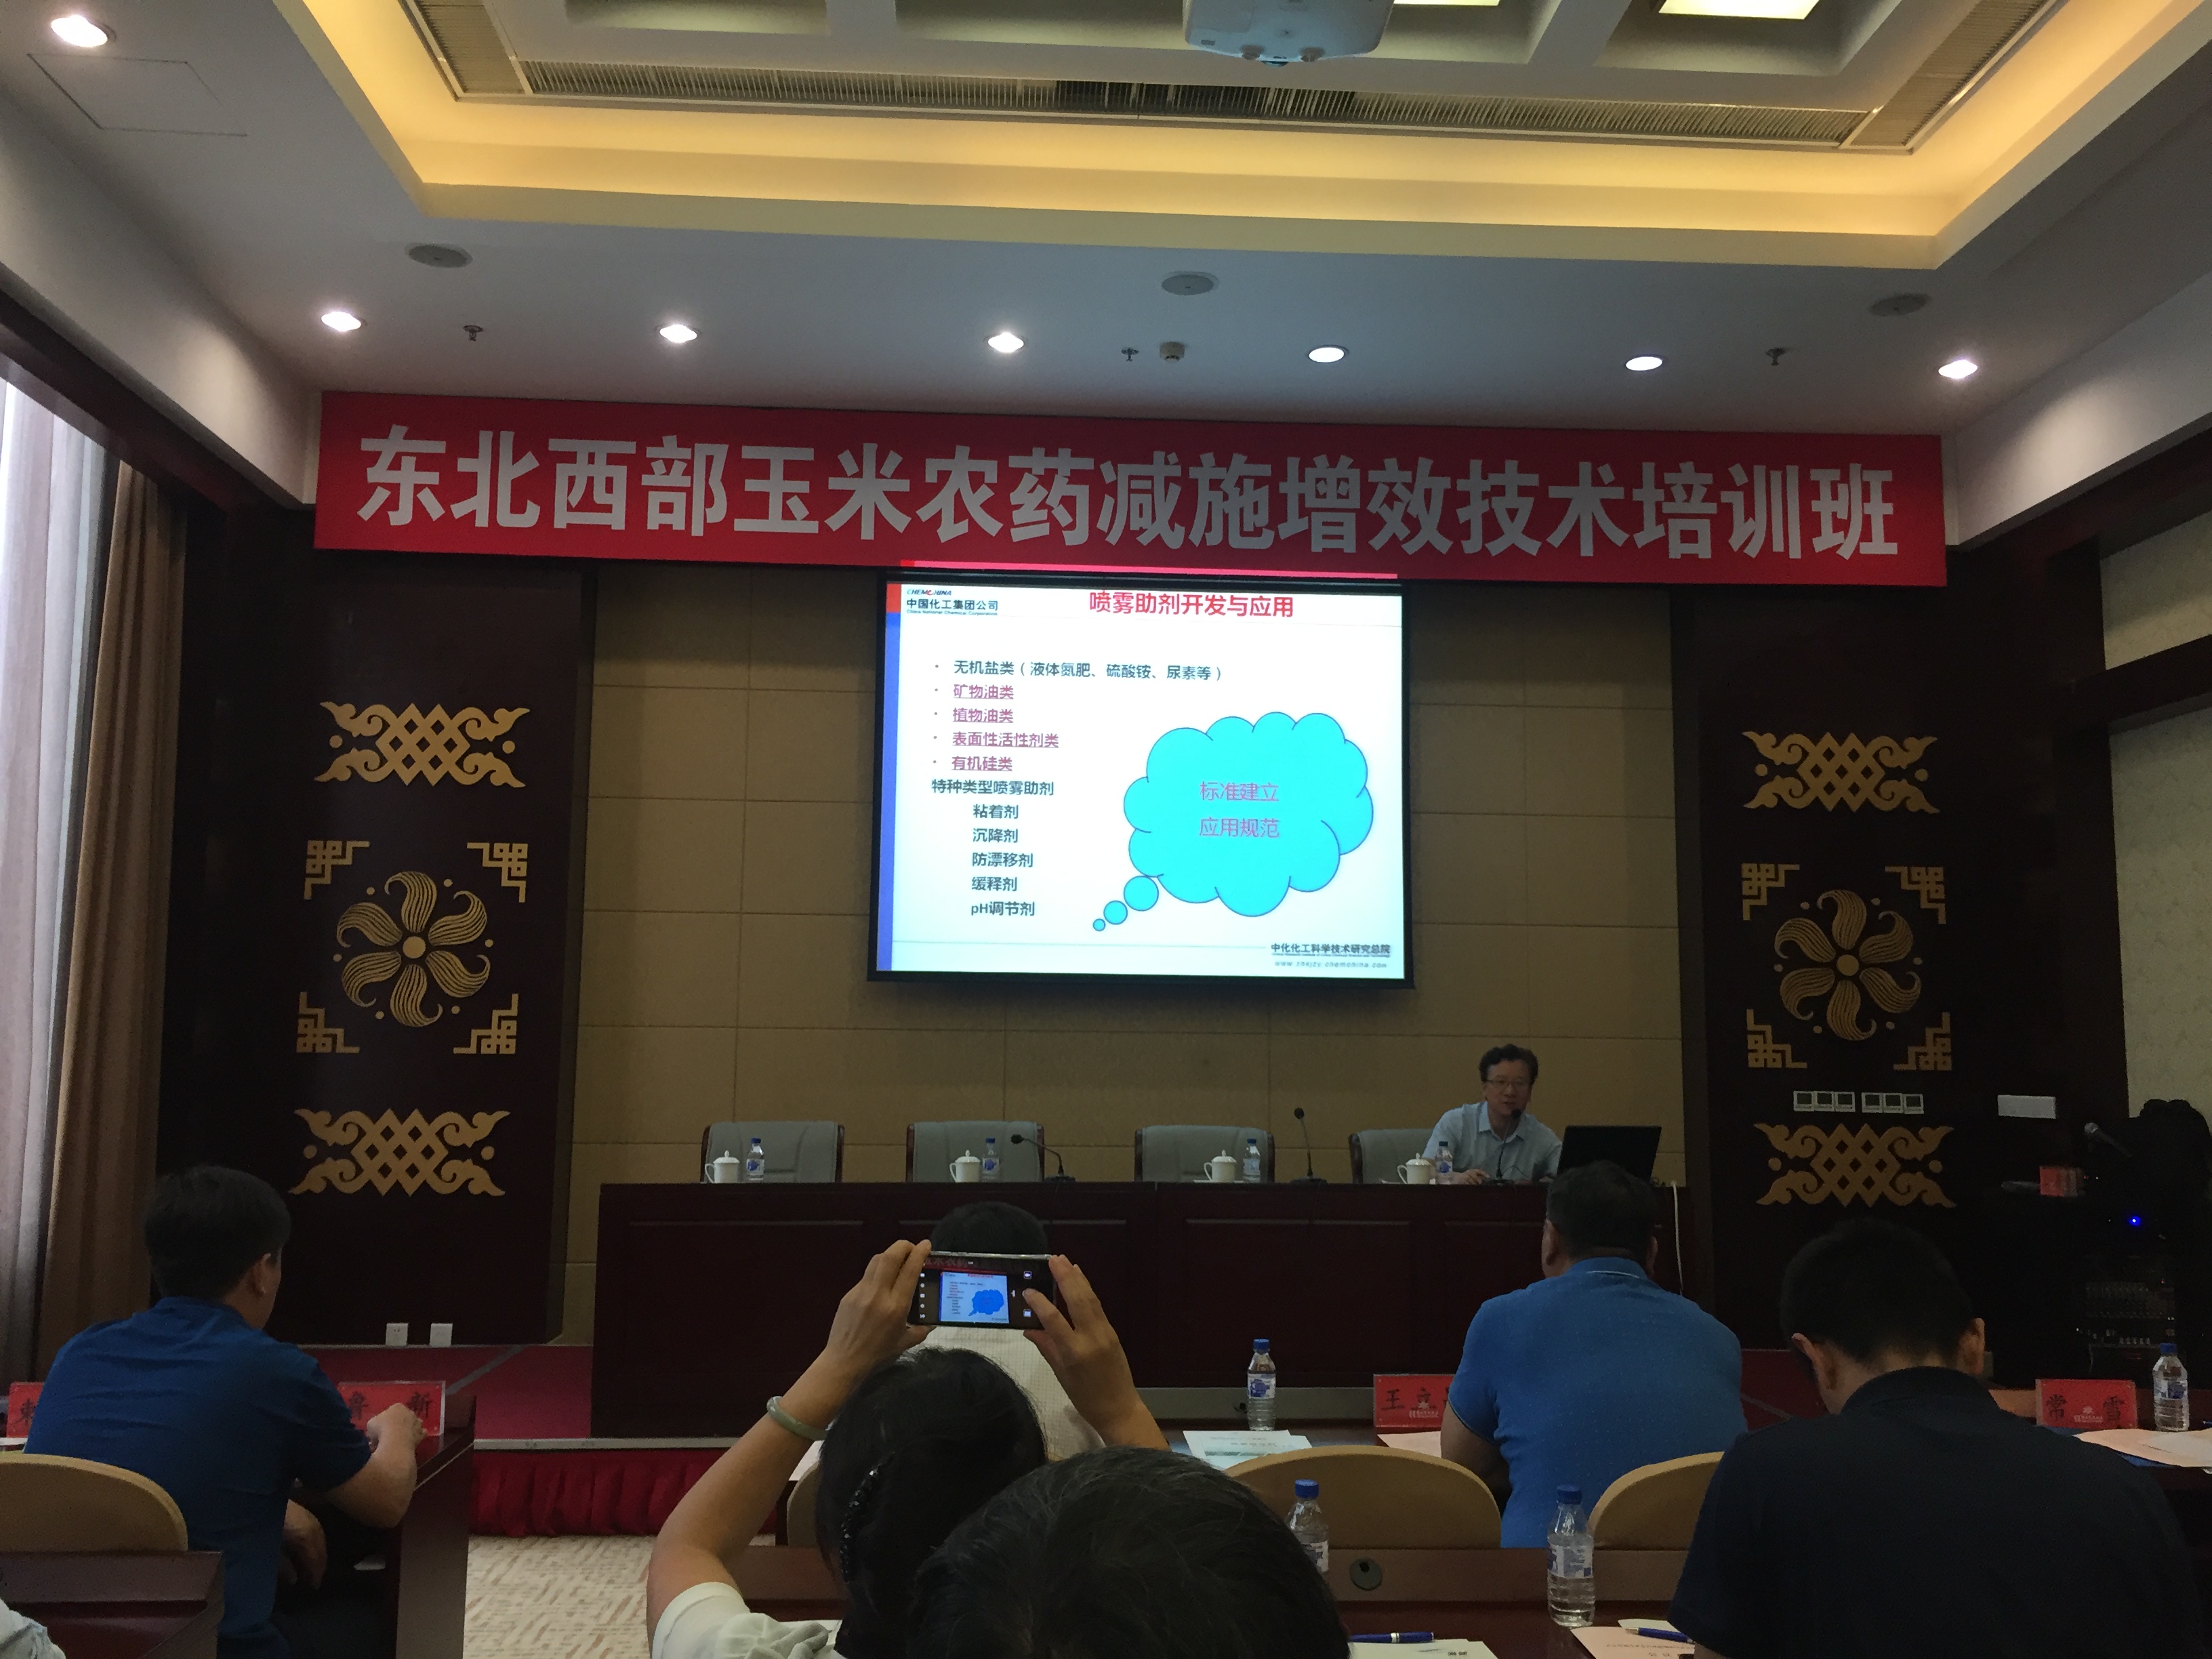 Grand AgroChem Co., Ltd. Was Invited to Attend the On-site View of Training Session on Reduction Delivery Synergism Technology of Pesticide for Corns in the West Area of Northeast Region